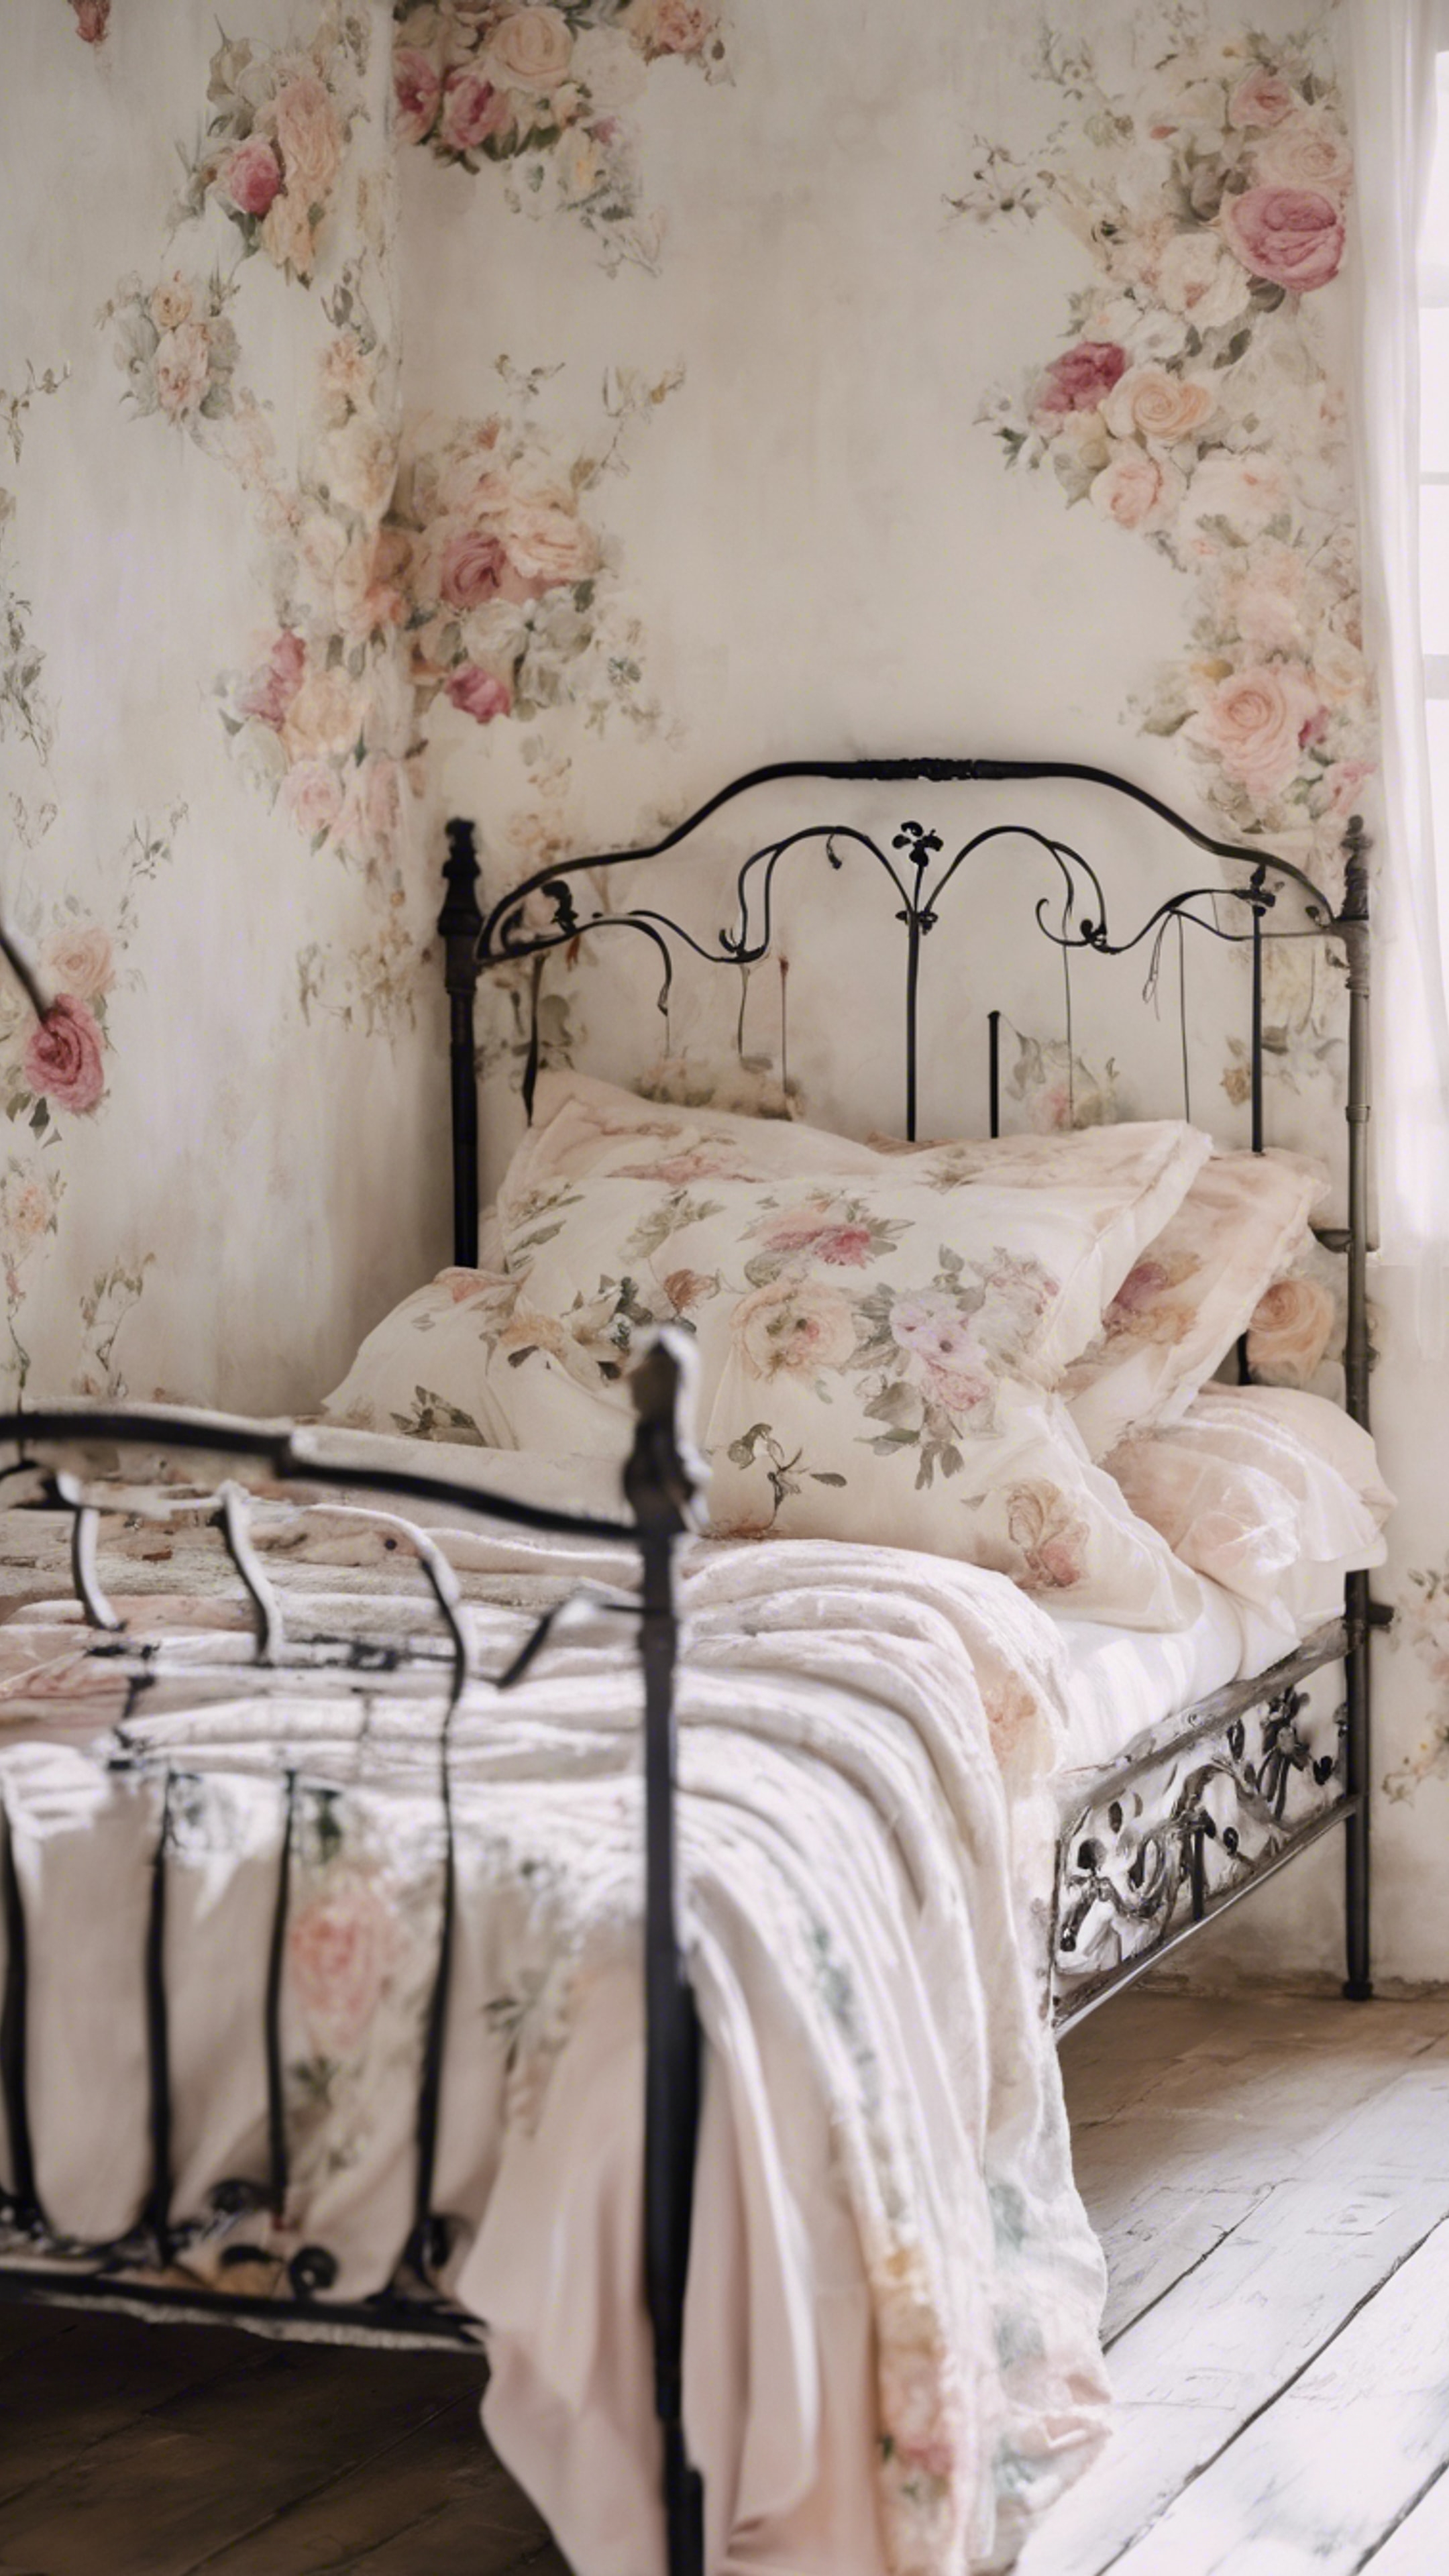 A French country bedroom featuring a wrought-iron bed and pastel floral patterns against whitewashed walls. Tapeta[80b94b8799dc4ca6abc7]